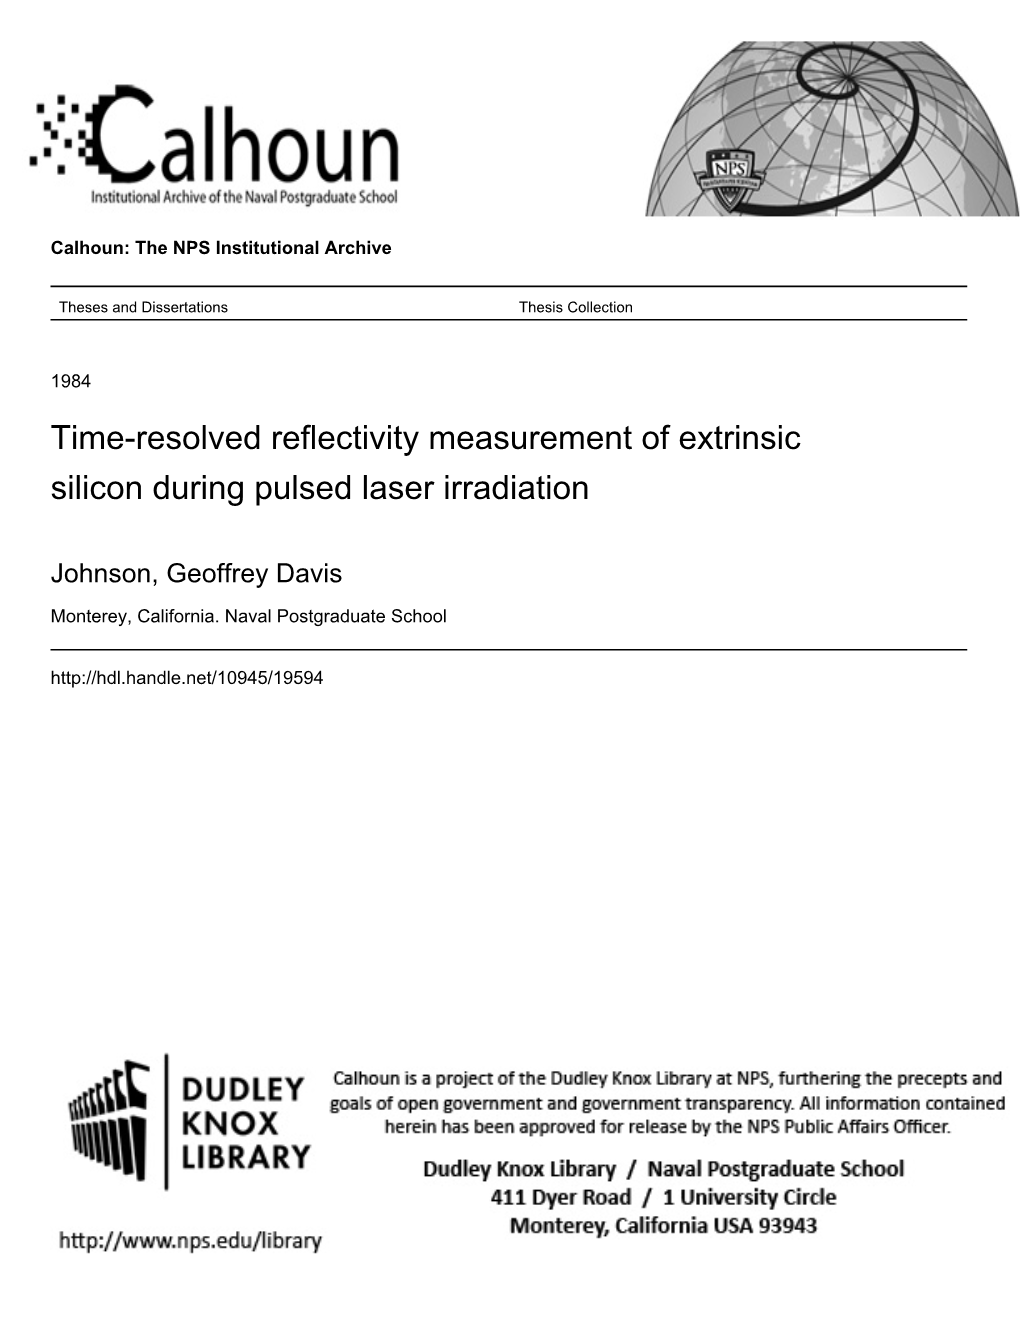 Time-Resolved Reflectivity Measurement of Extrinsic Silicon During Pulsed Laser Irradiation